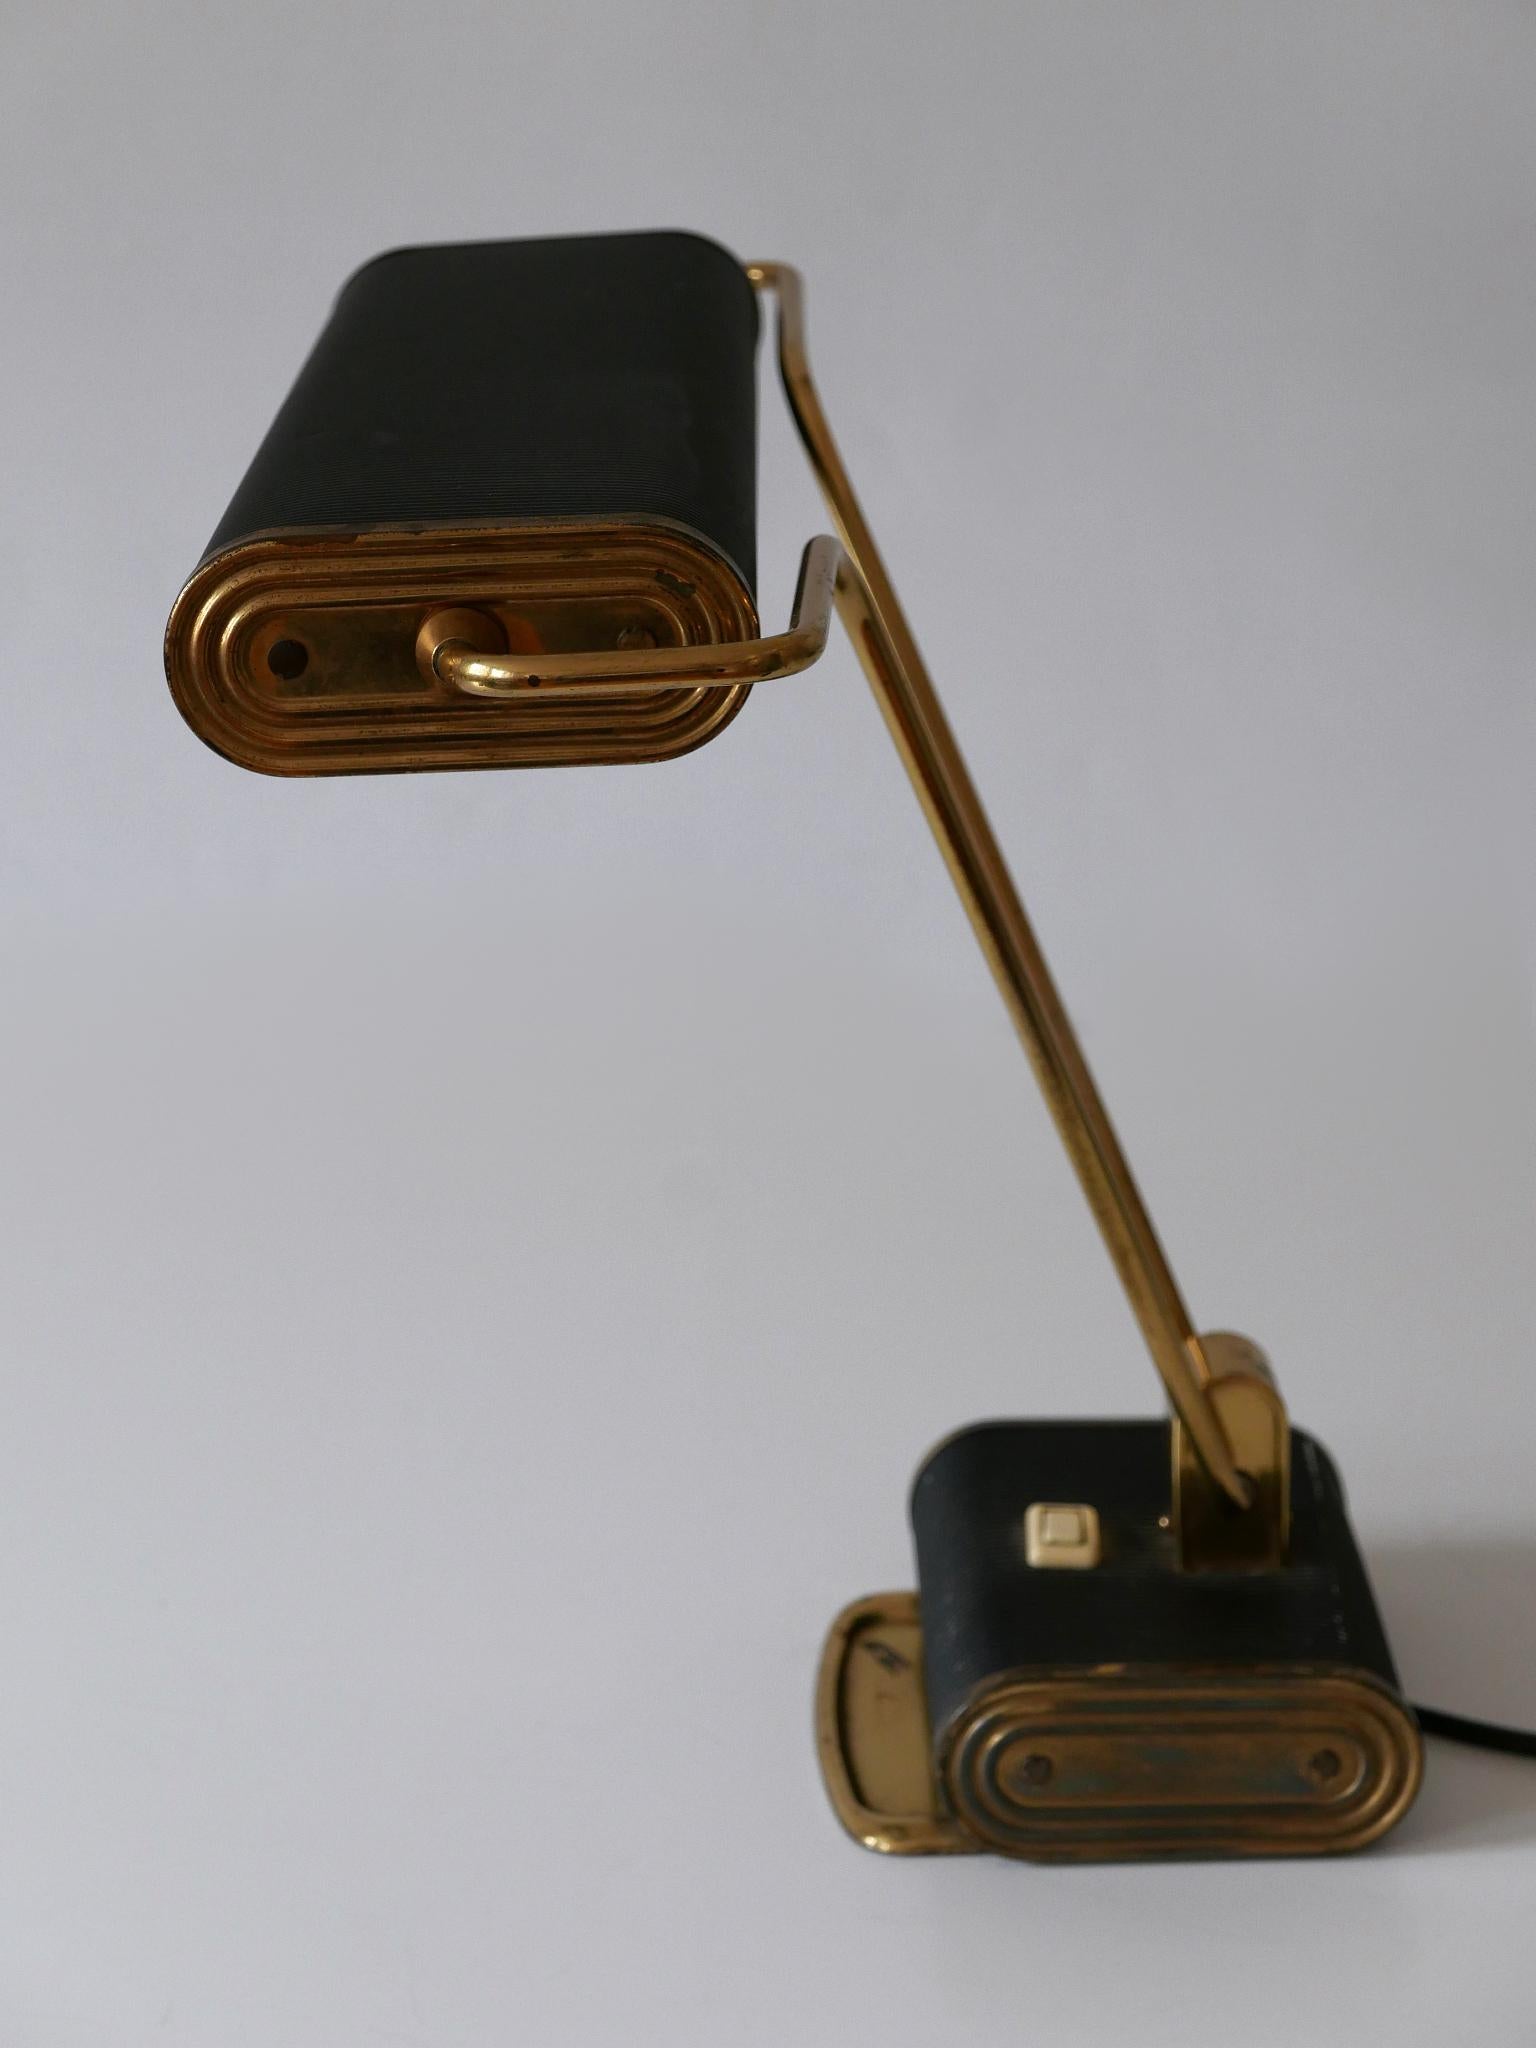 Art Deco Table Lamp or Desk Light 'No 71' by André Mounique for Jumo 1930s For Sale 7